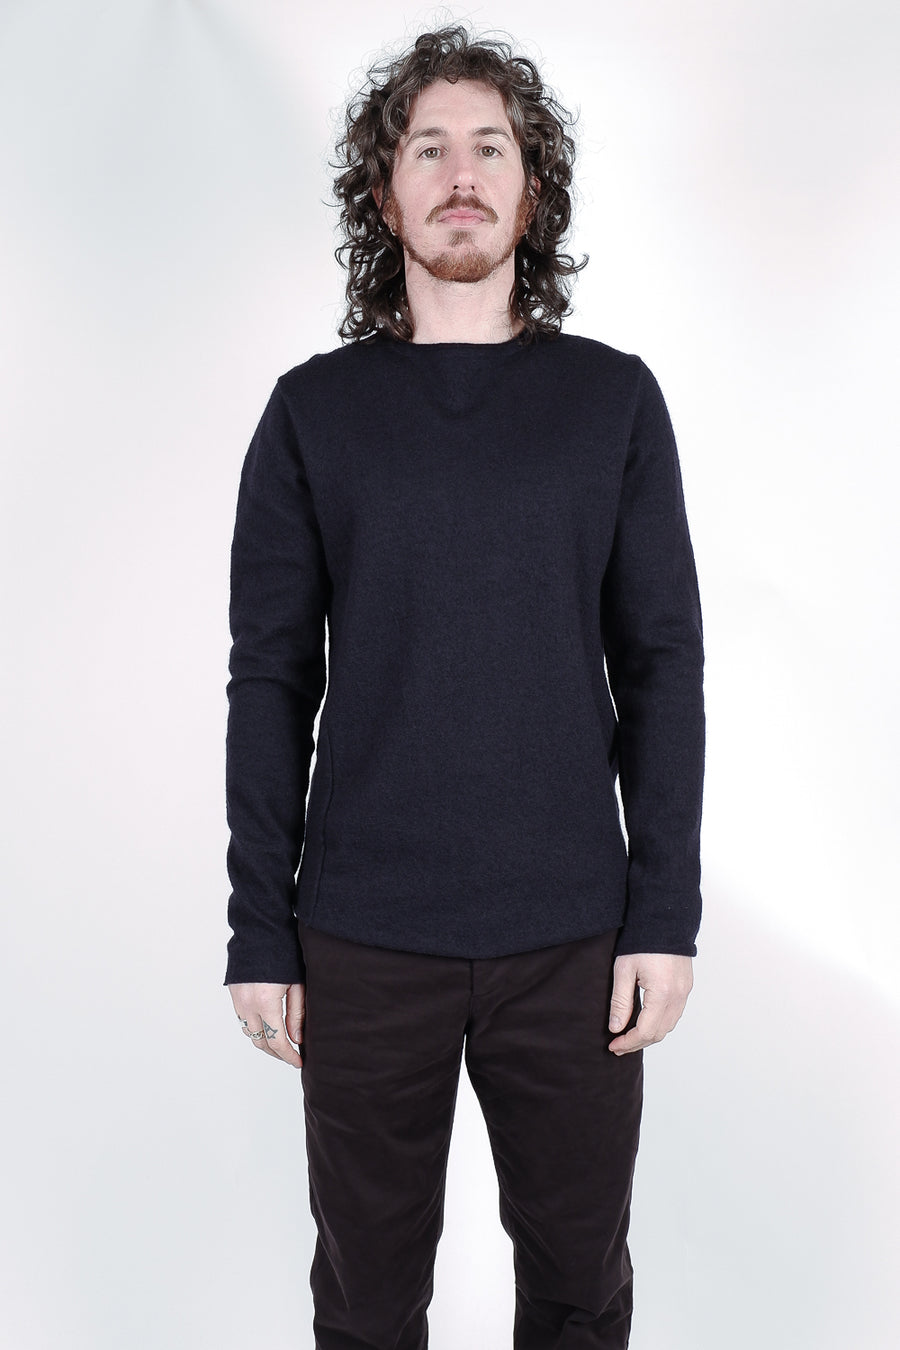 Buy the Buy the Hannes Roether Boiled Wool Sweatshirt in Navy at Intro. Spend £50 for free UK delivery. Official stockists. We ship worldwide.